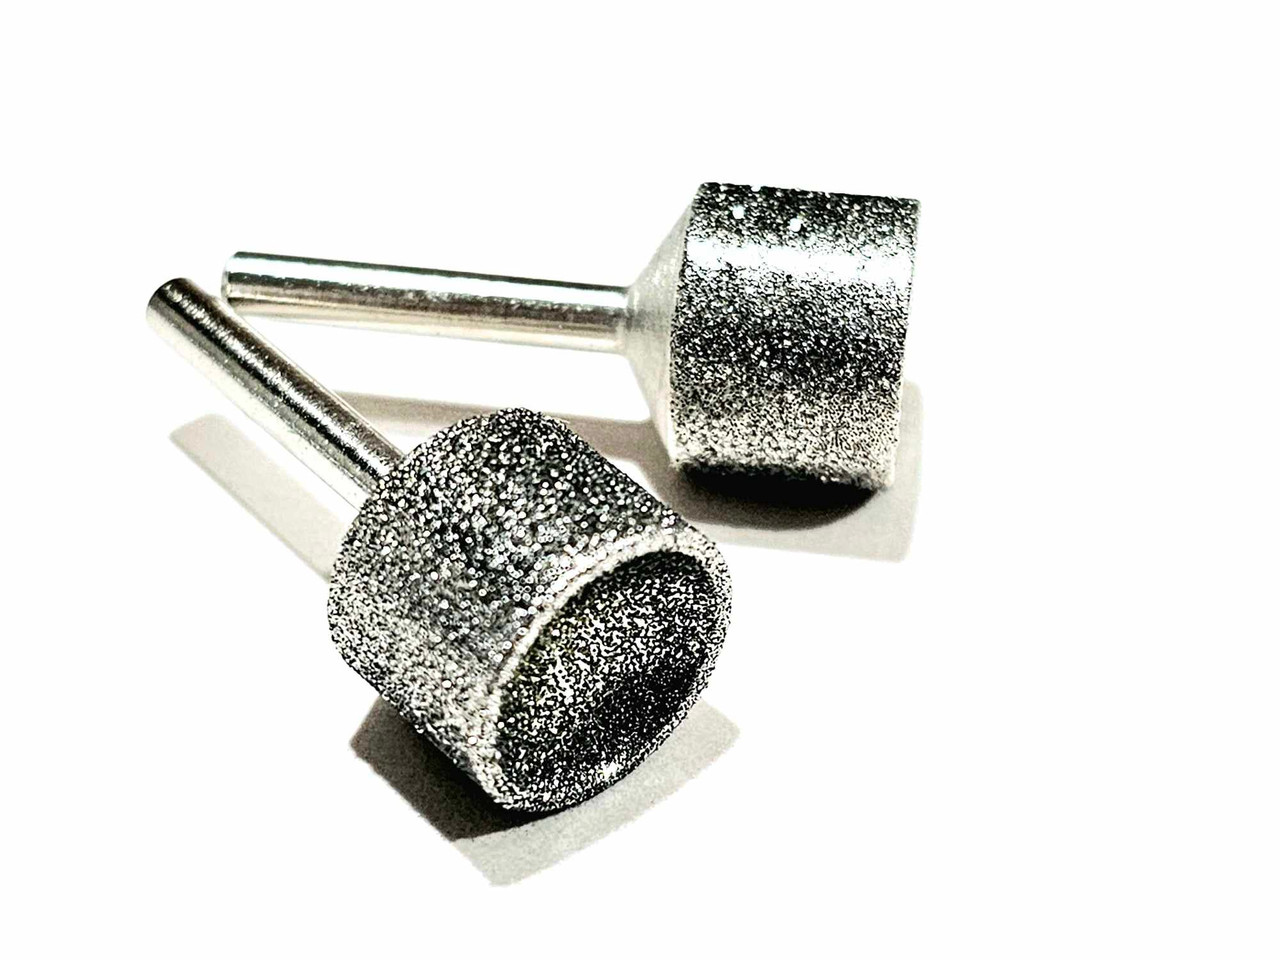 Diamond Dremel Bits - 3 Sizes, 2 in 1 Nail Grinder/Polisher Attachments -  Leading Edge Sharpening Services